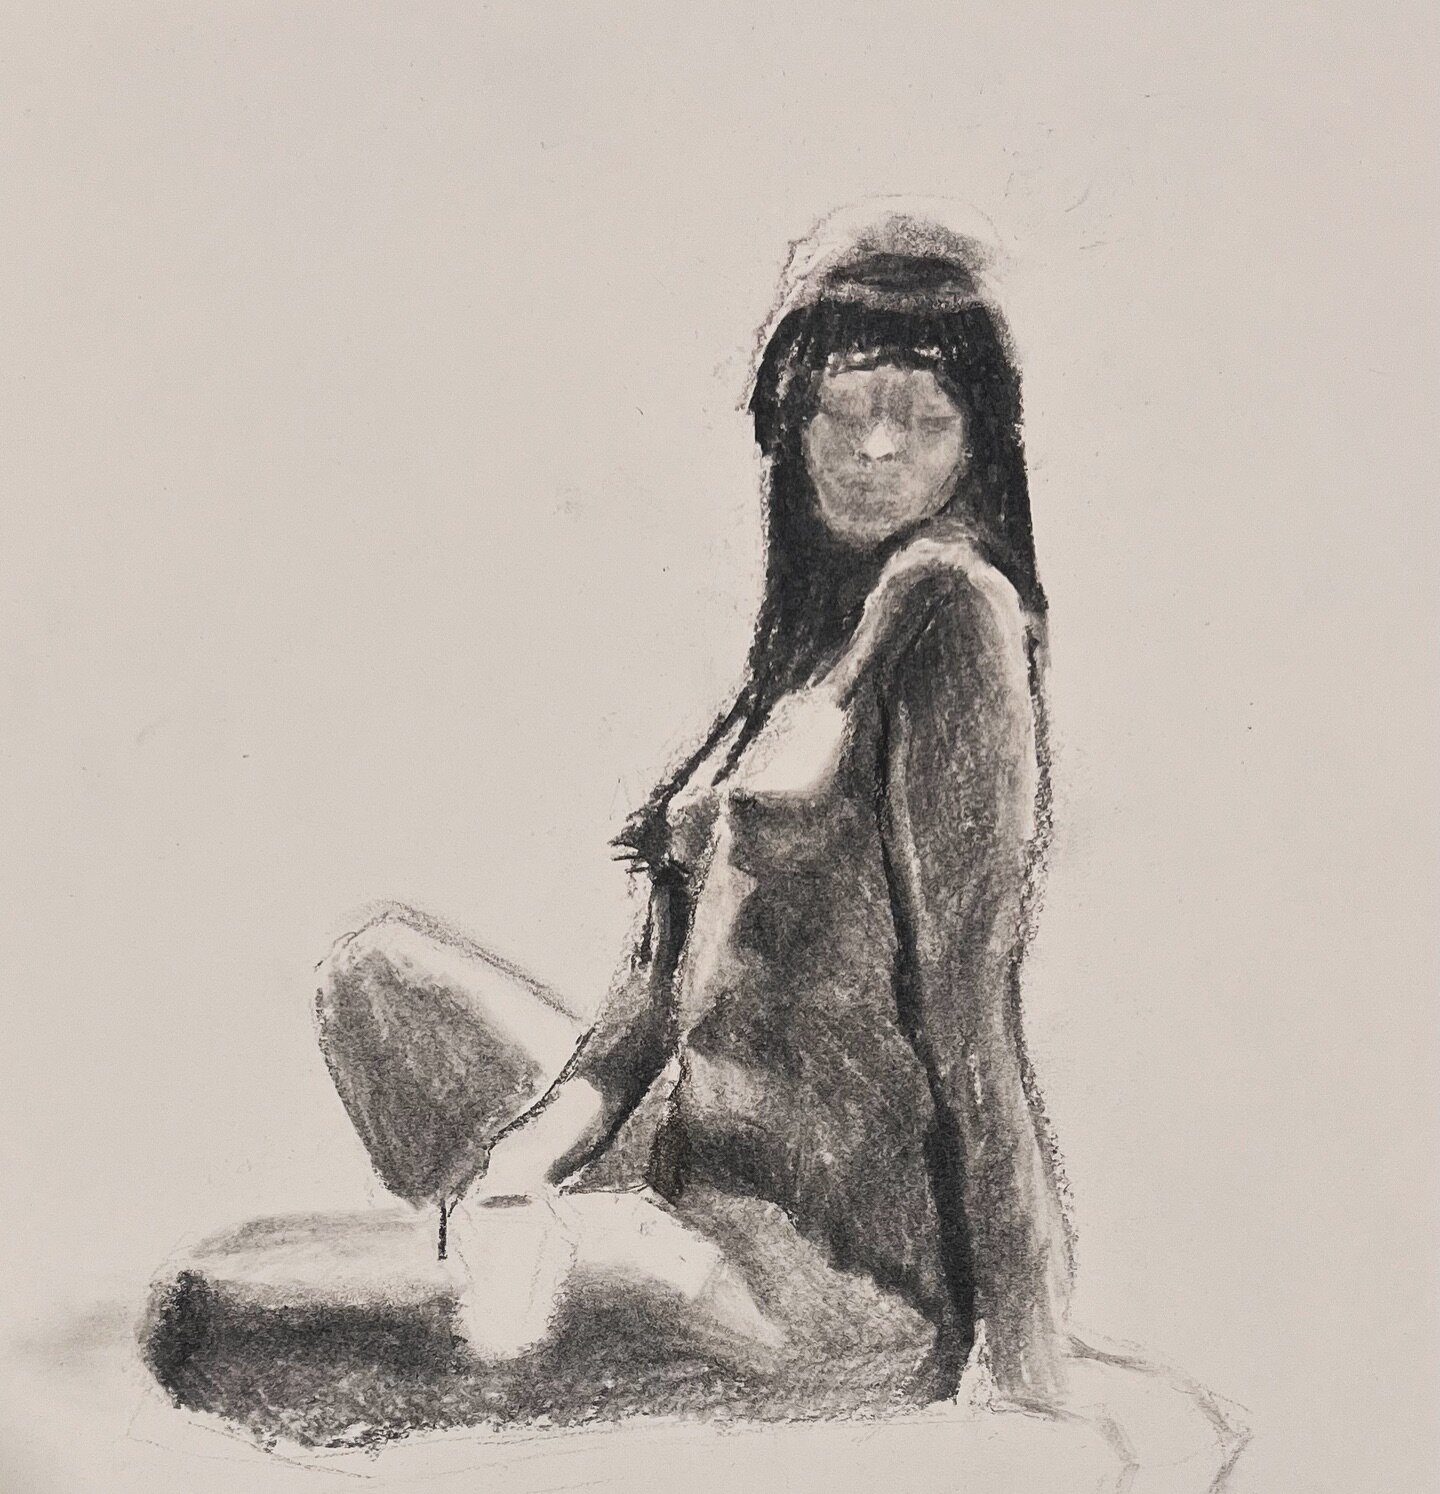 A 15 minute pose from the other week at @sketch_appeal_life_drawing at the @brunswickpicturehouse